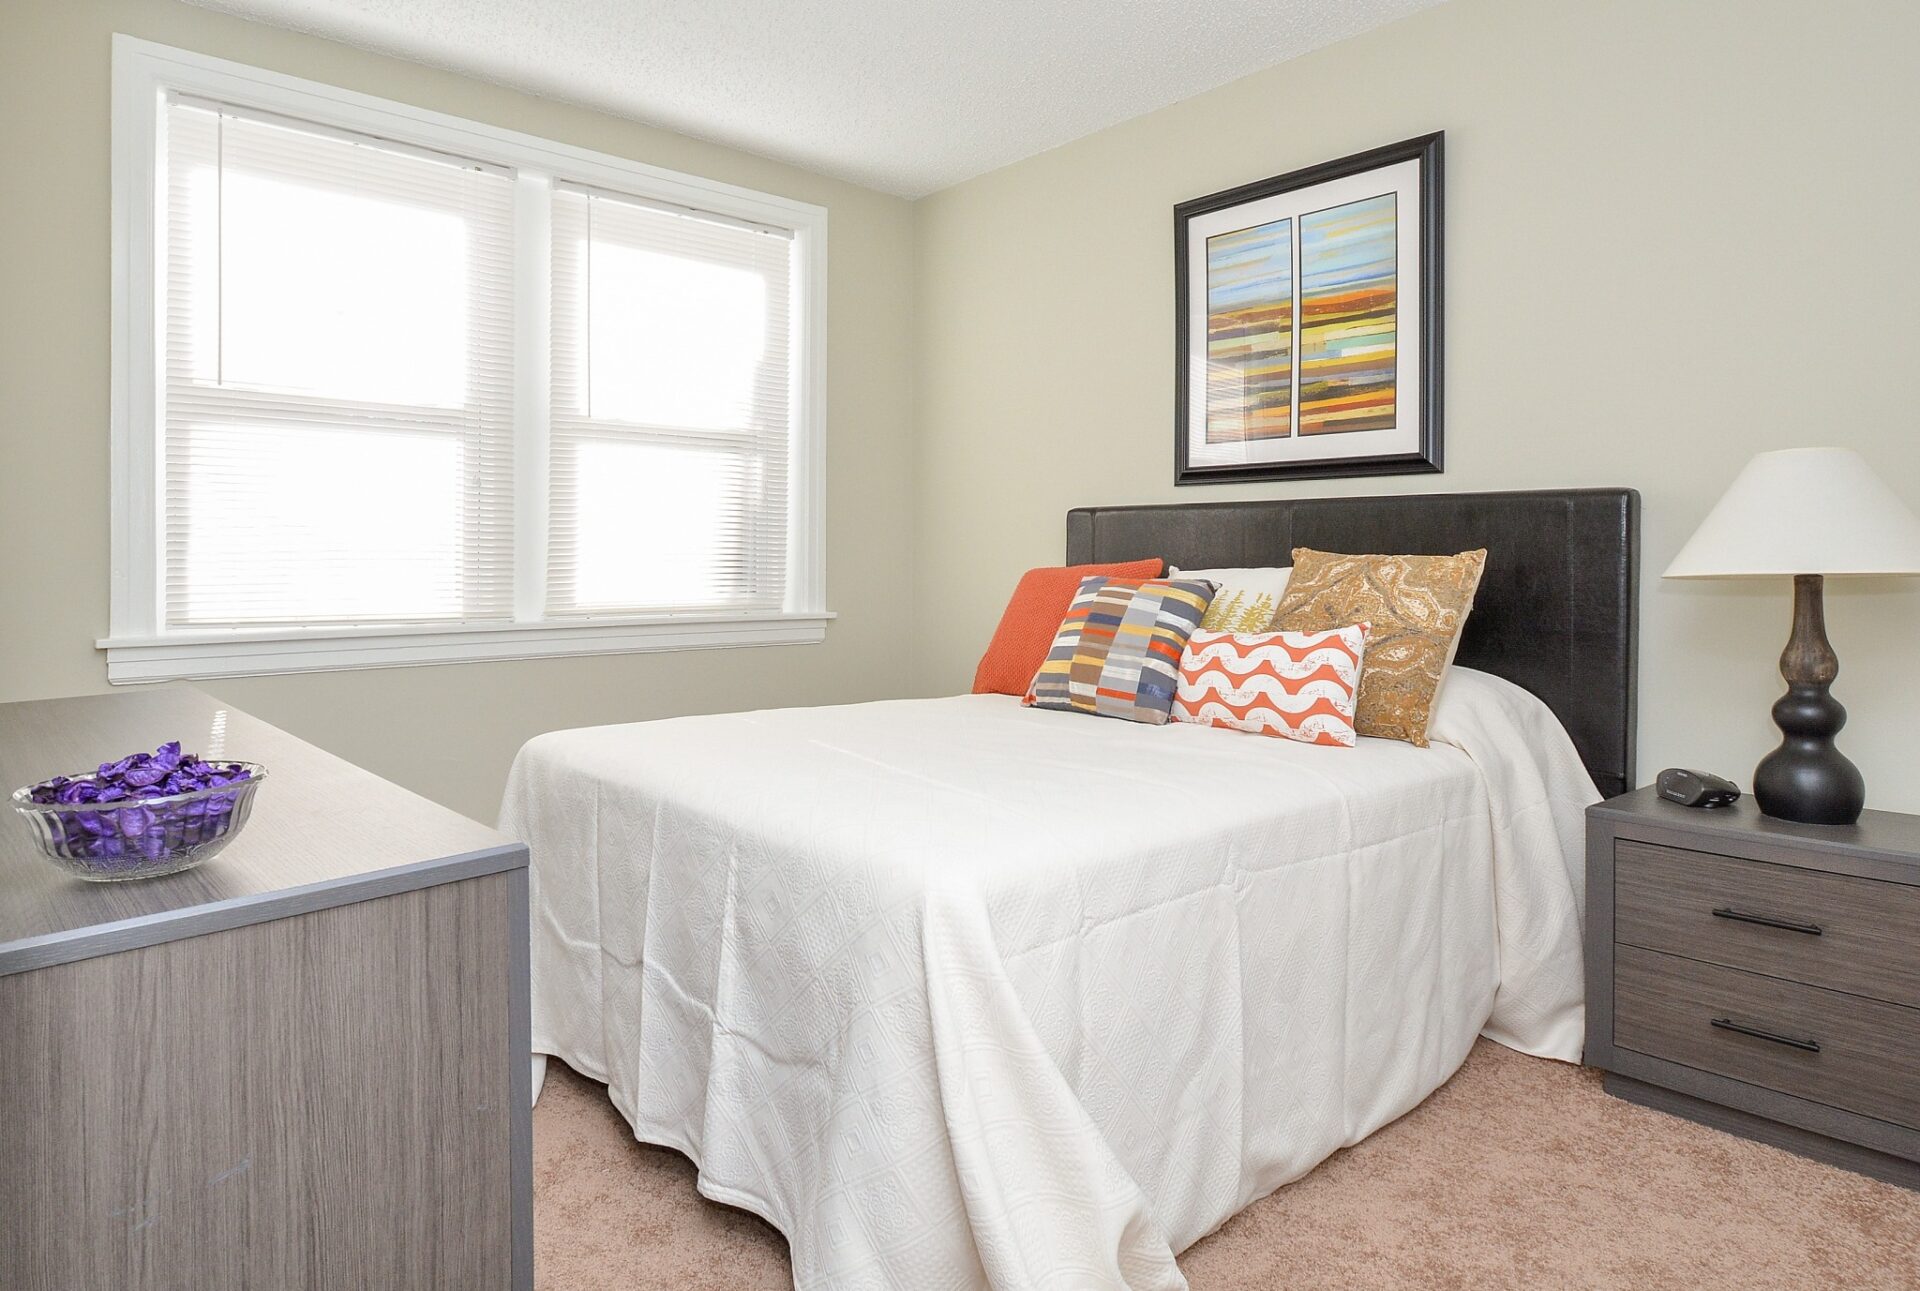 Suburban Court bedroom with carpeting, queen bed and windows